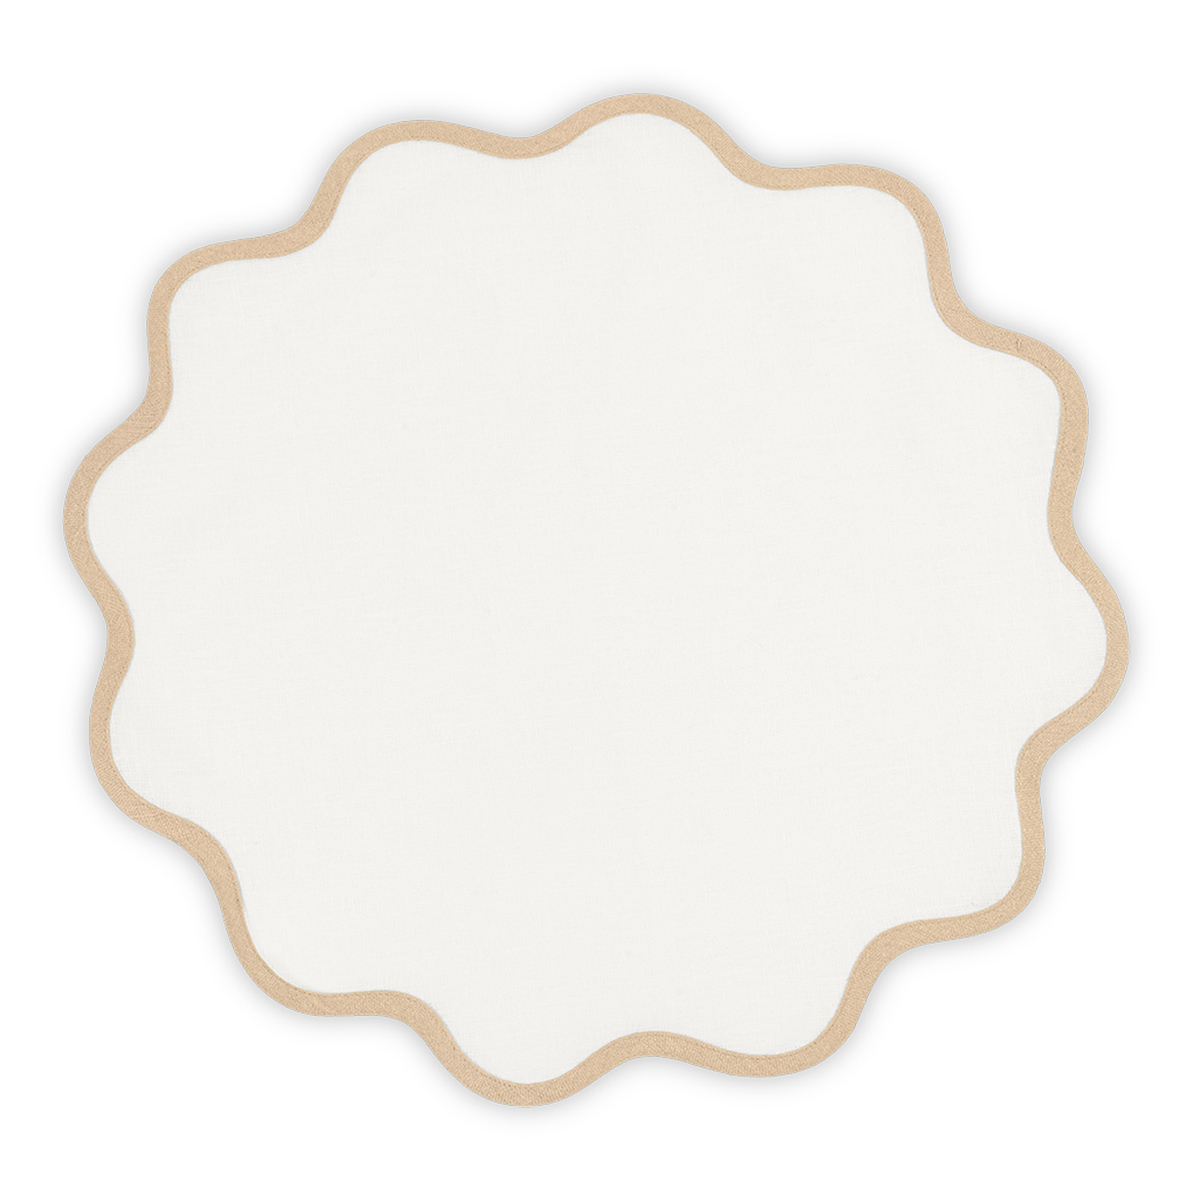 Silo Image of Matouk Scallop Edge Circle Placemat in Color Oat